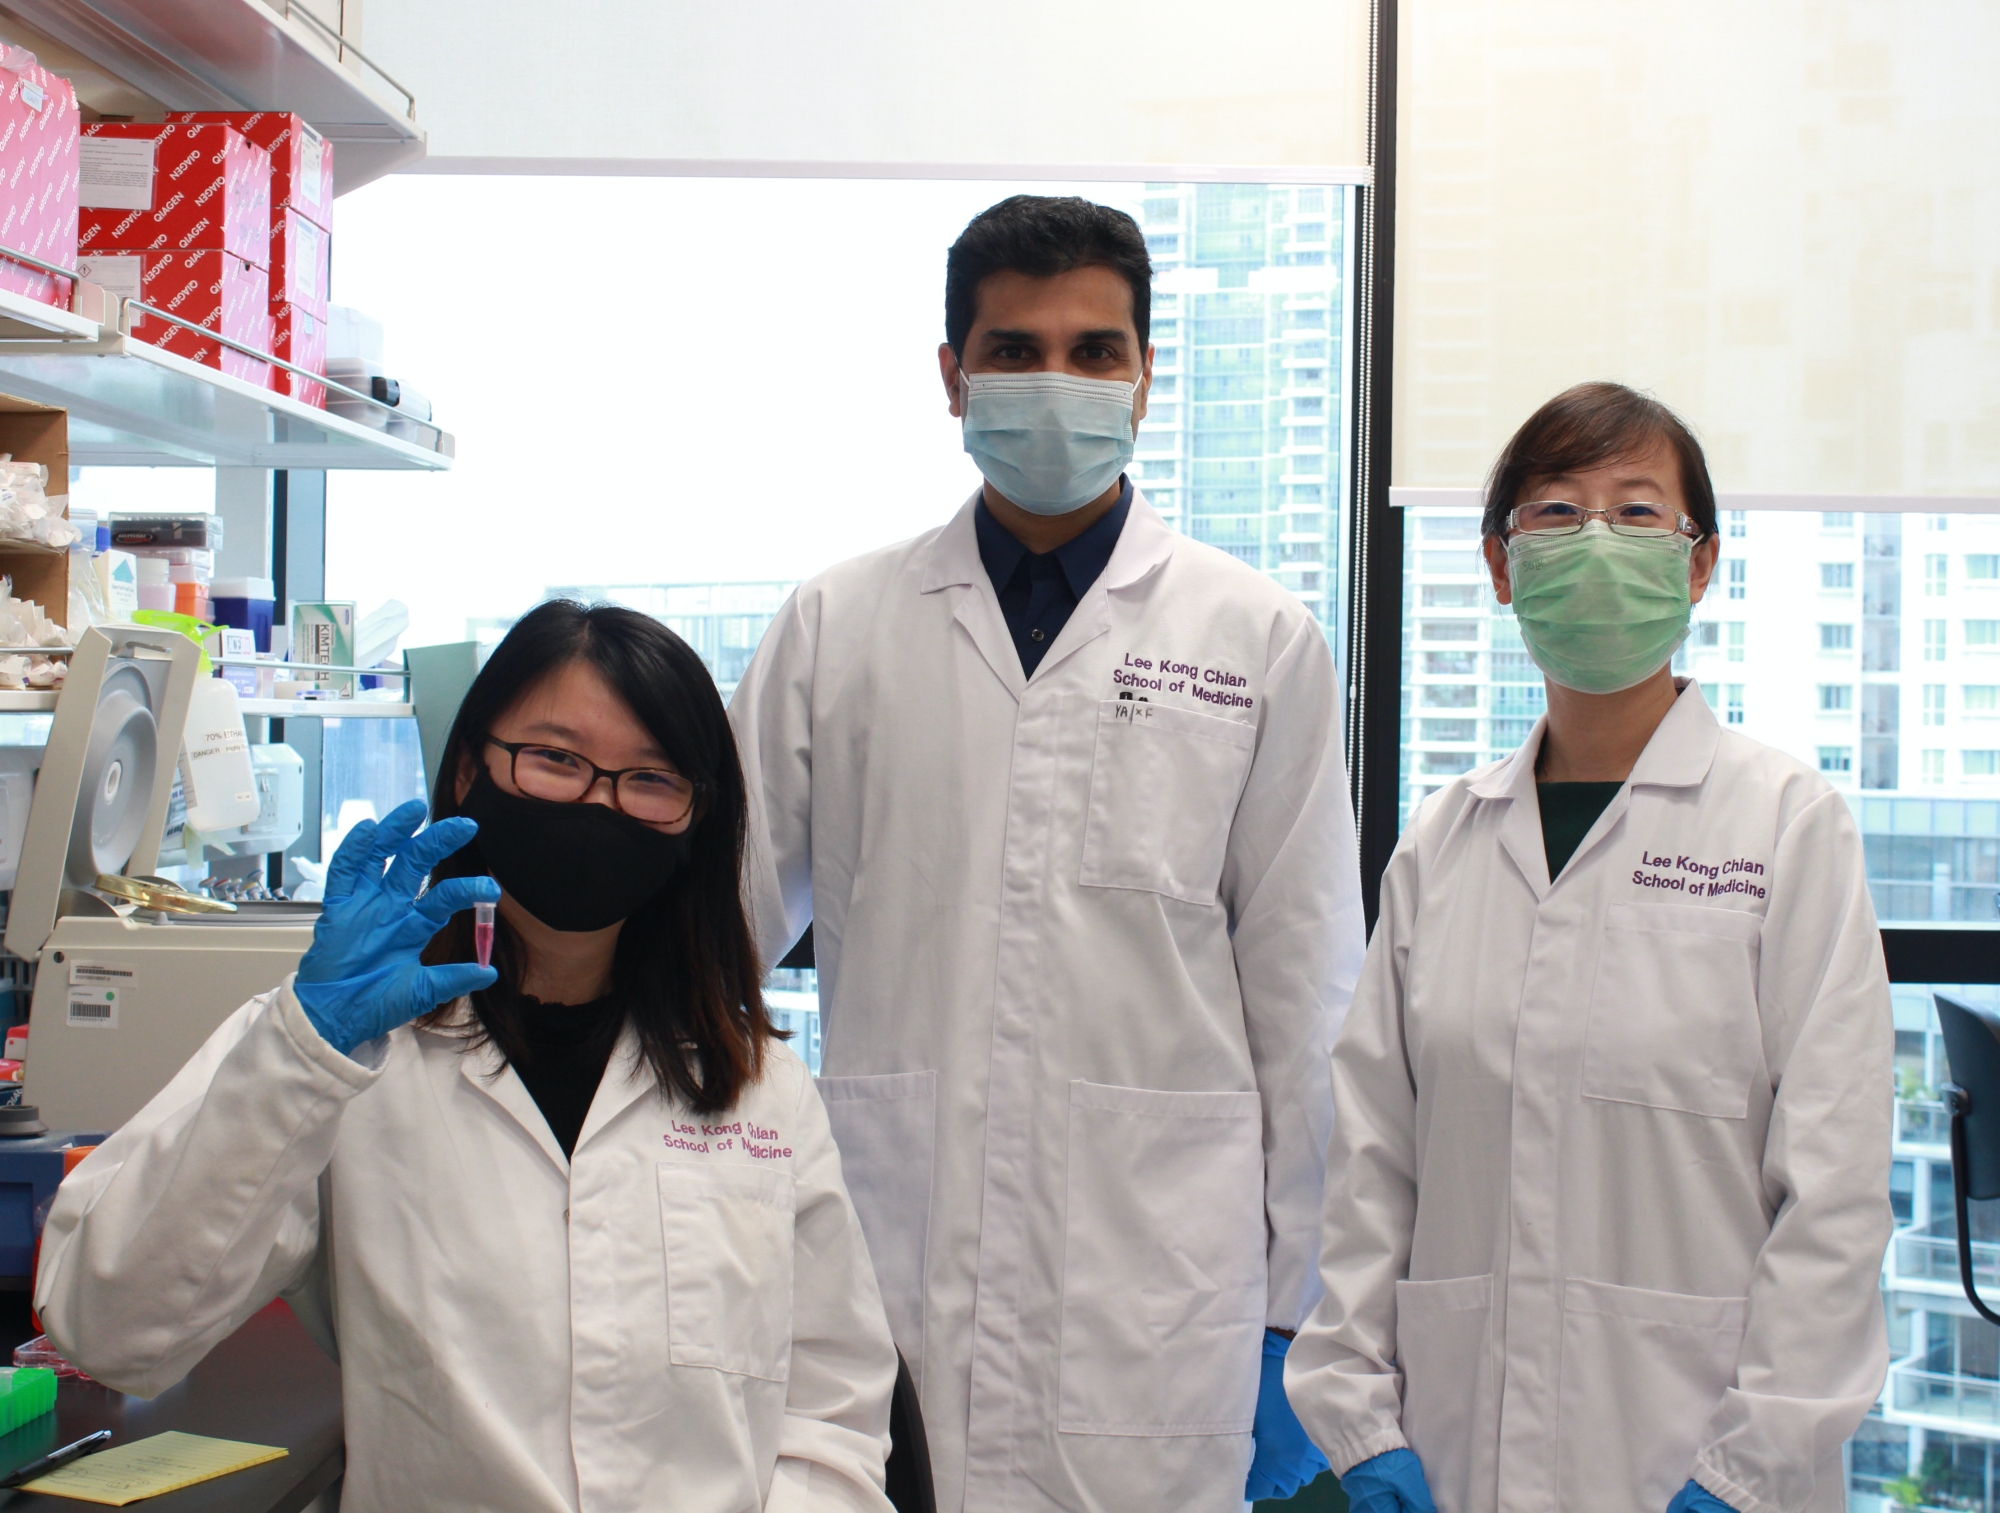 NTU Singapore scientists develop oral insulin nanoparticles that could one day be an alternative to injections